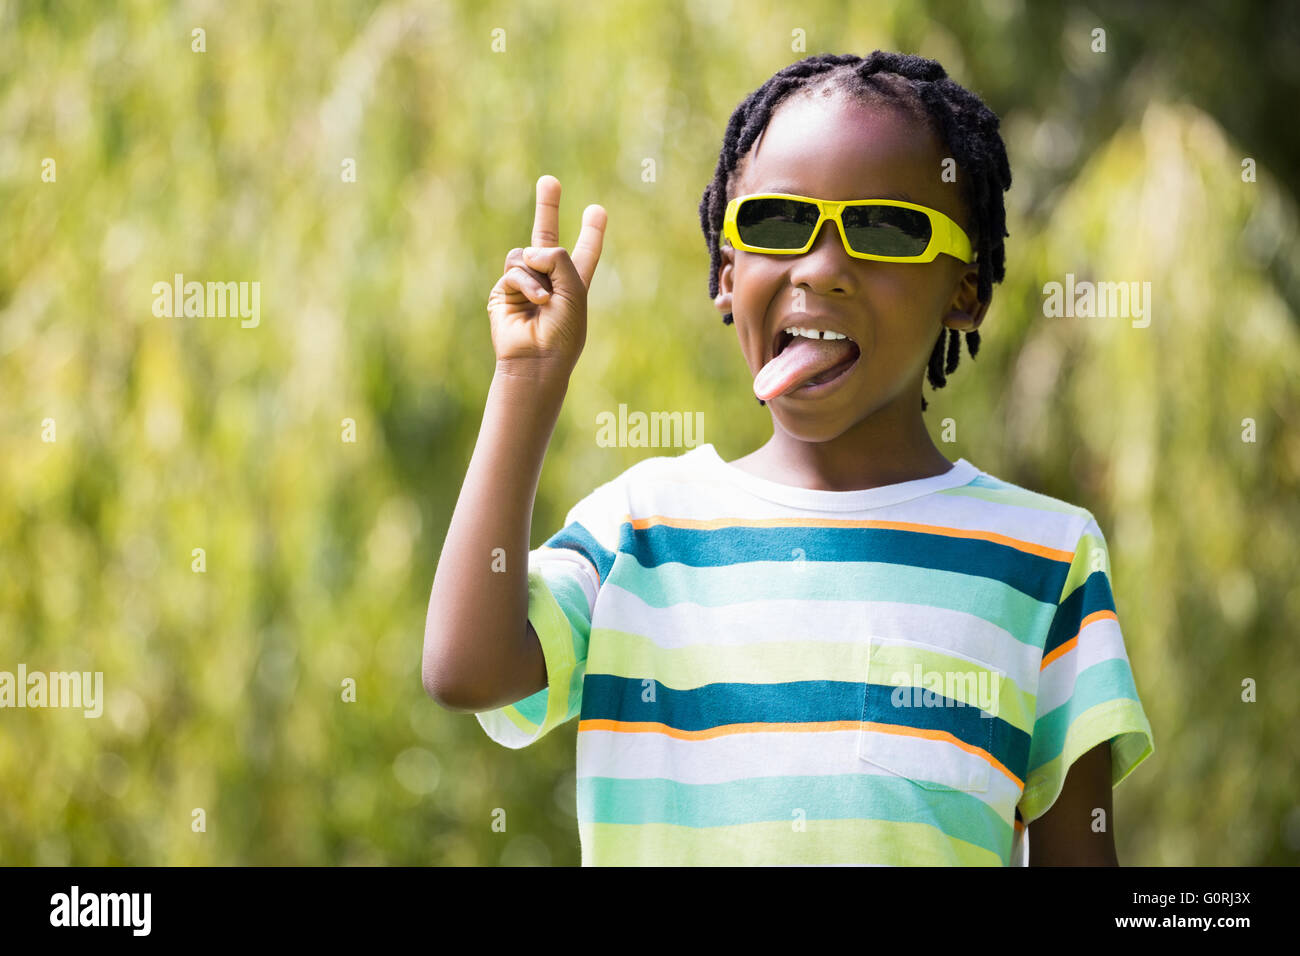 A kid with sunglasses making faces Stock Photo